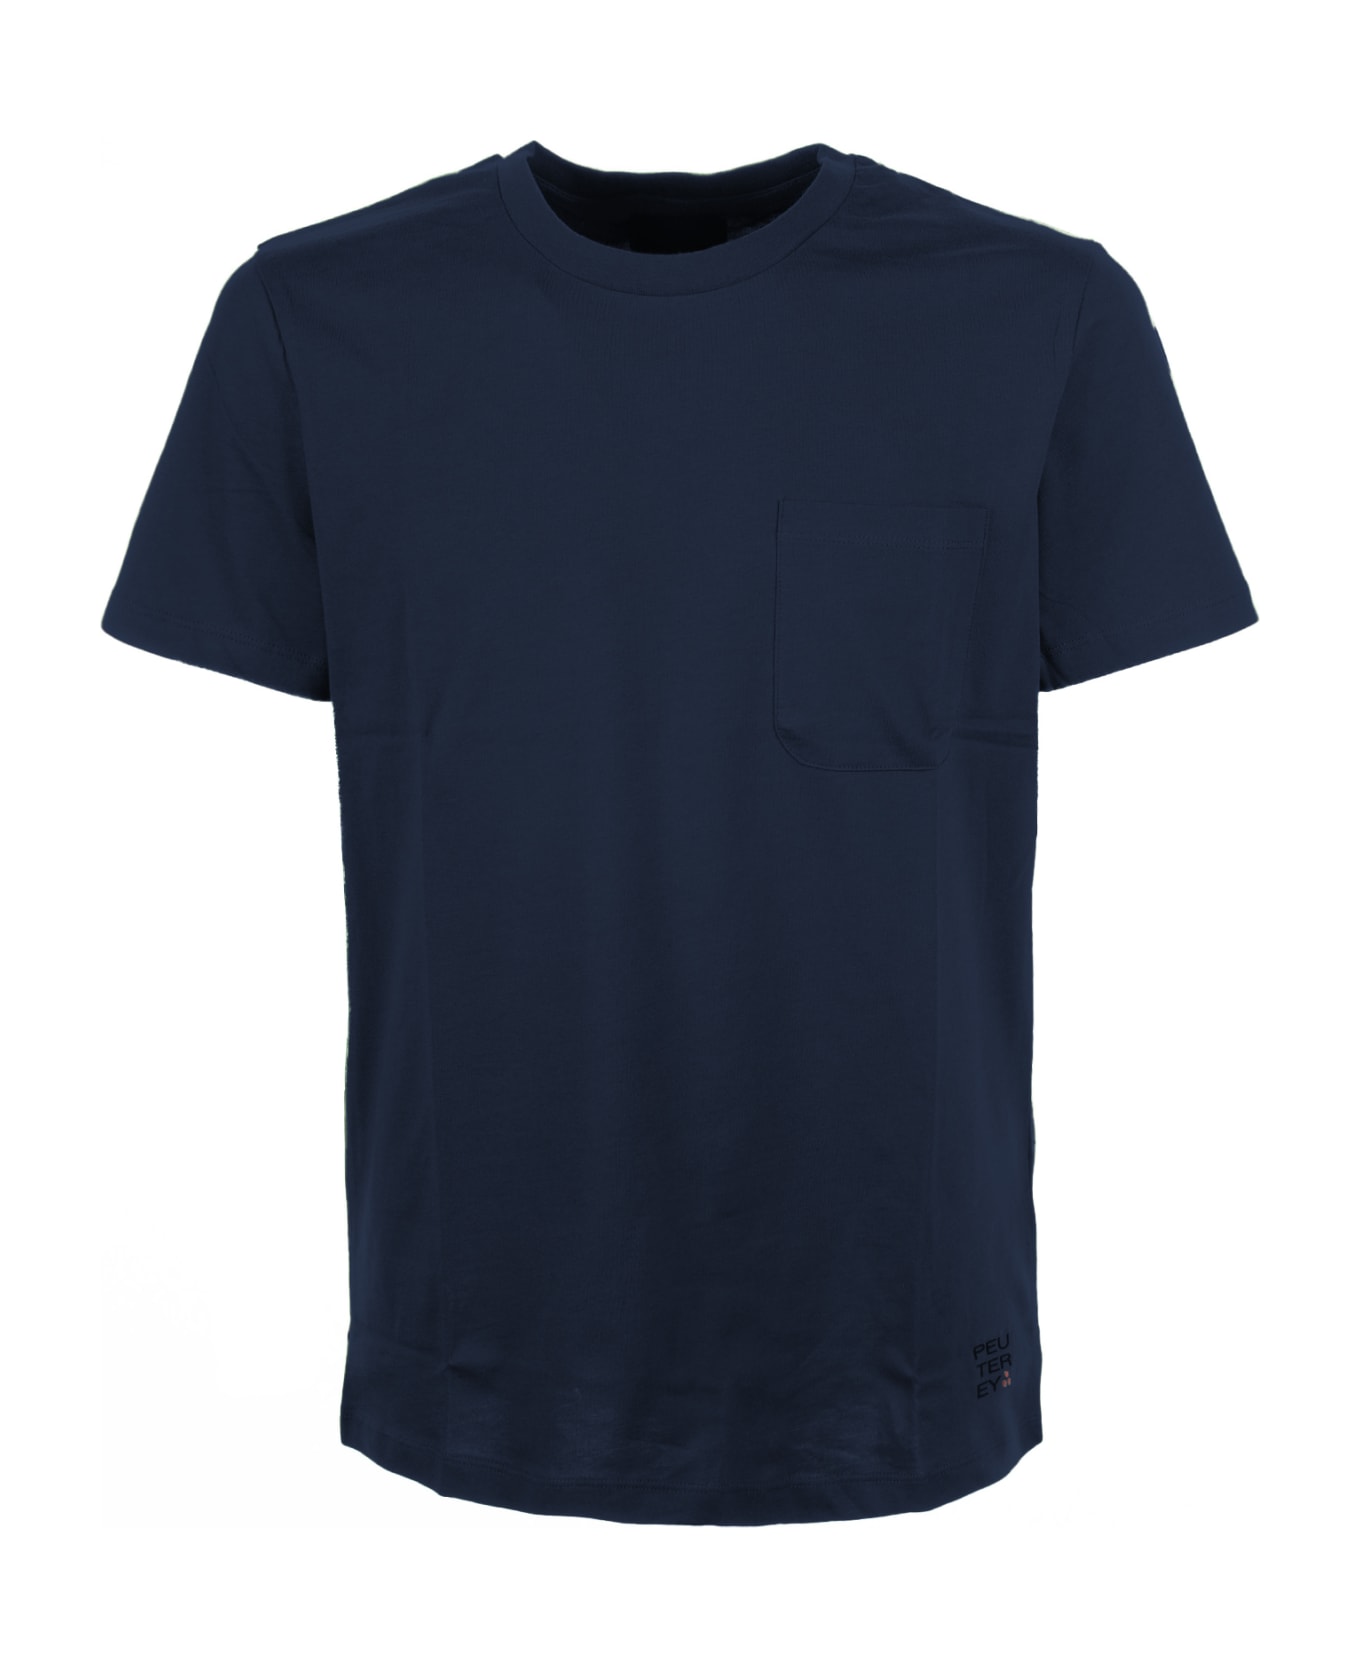 Peuterey Navy Blue T-shirt With Pocket - Blu